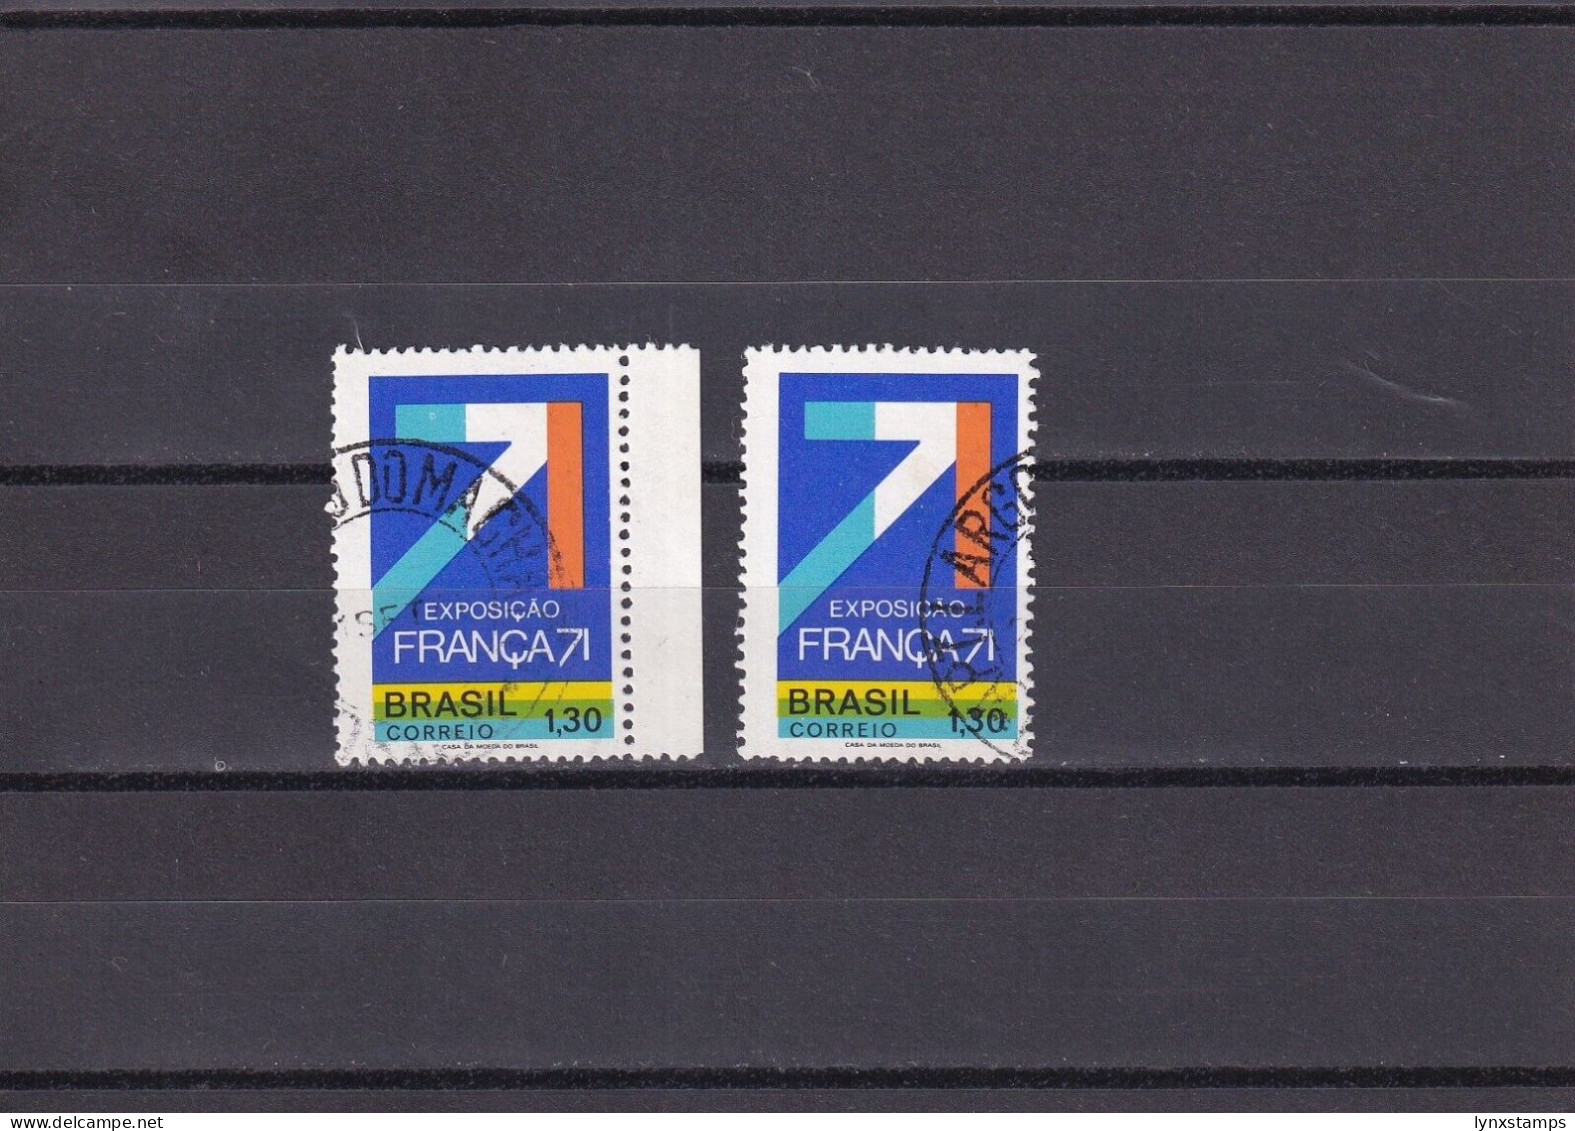 SA06 Brazil 1971 Industrial, Technical And Scientific Exhibition Franca 71 Used - Gebraucht